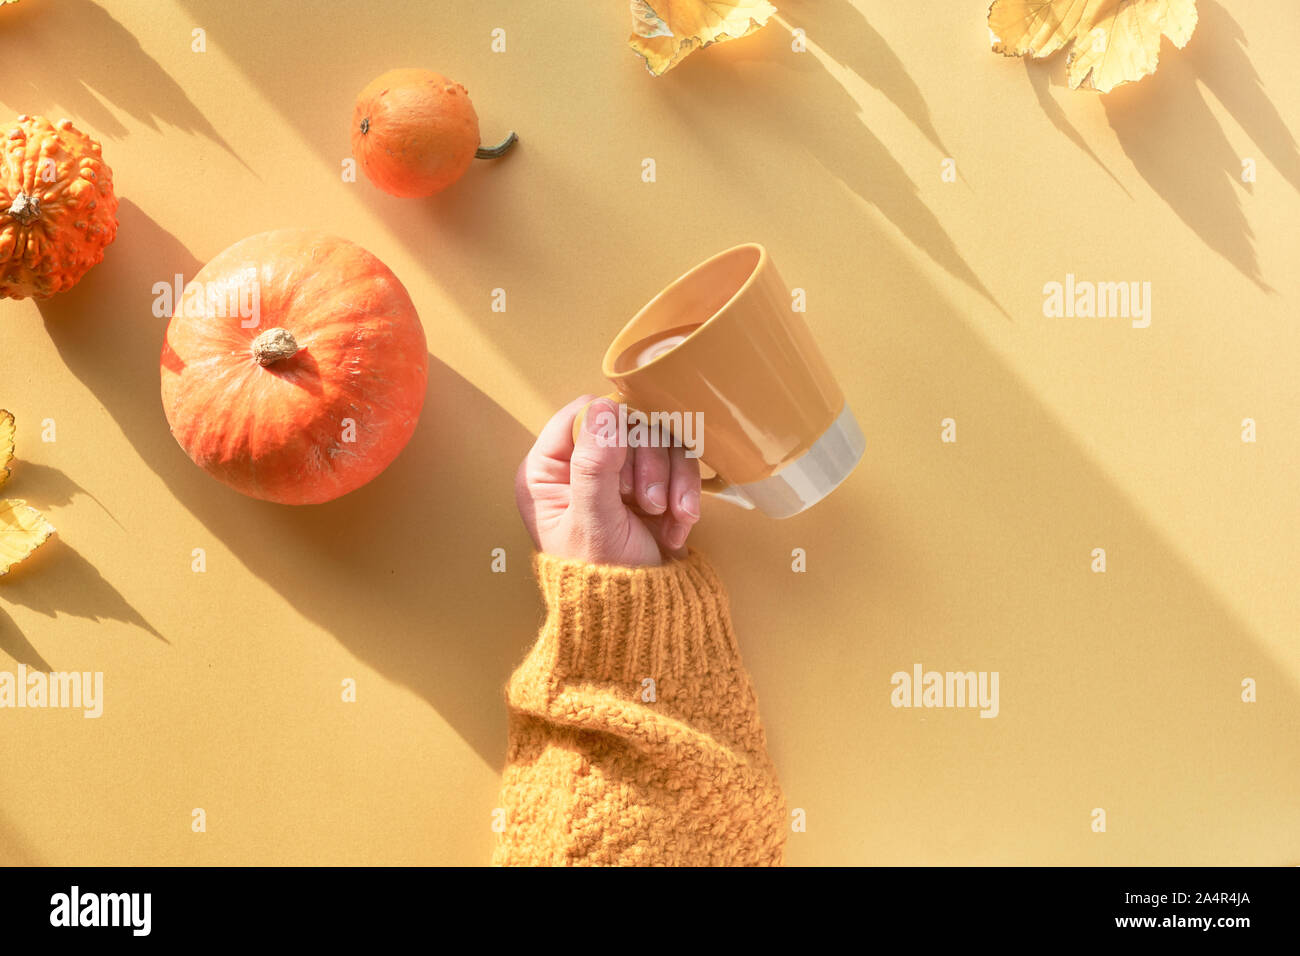 Yellow paper flat lay with female hand holding cup of coffee, decorative pumpkins, quince and maple leaves. Top view with long shadows and copy-space. Stock Photo